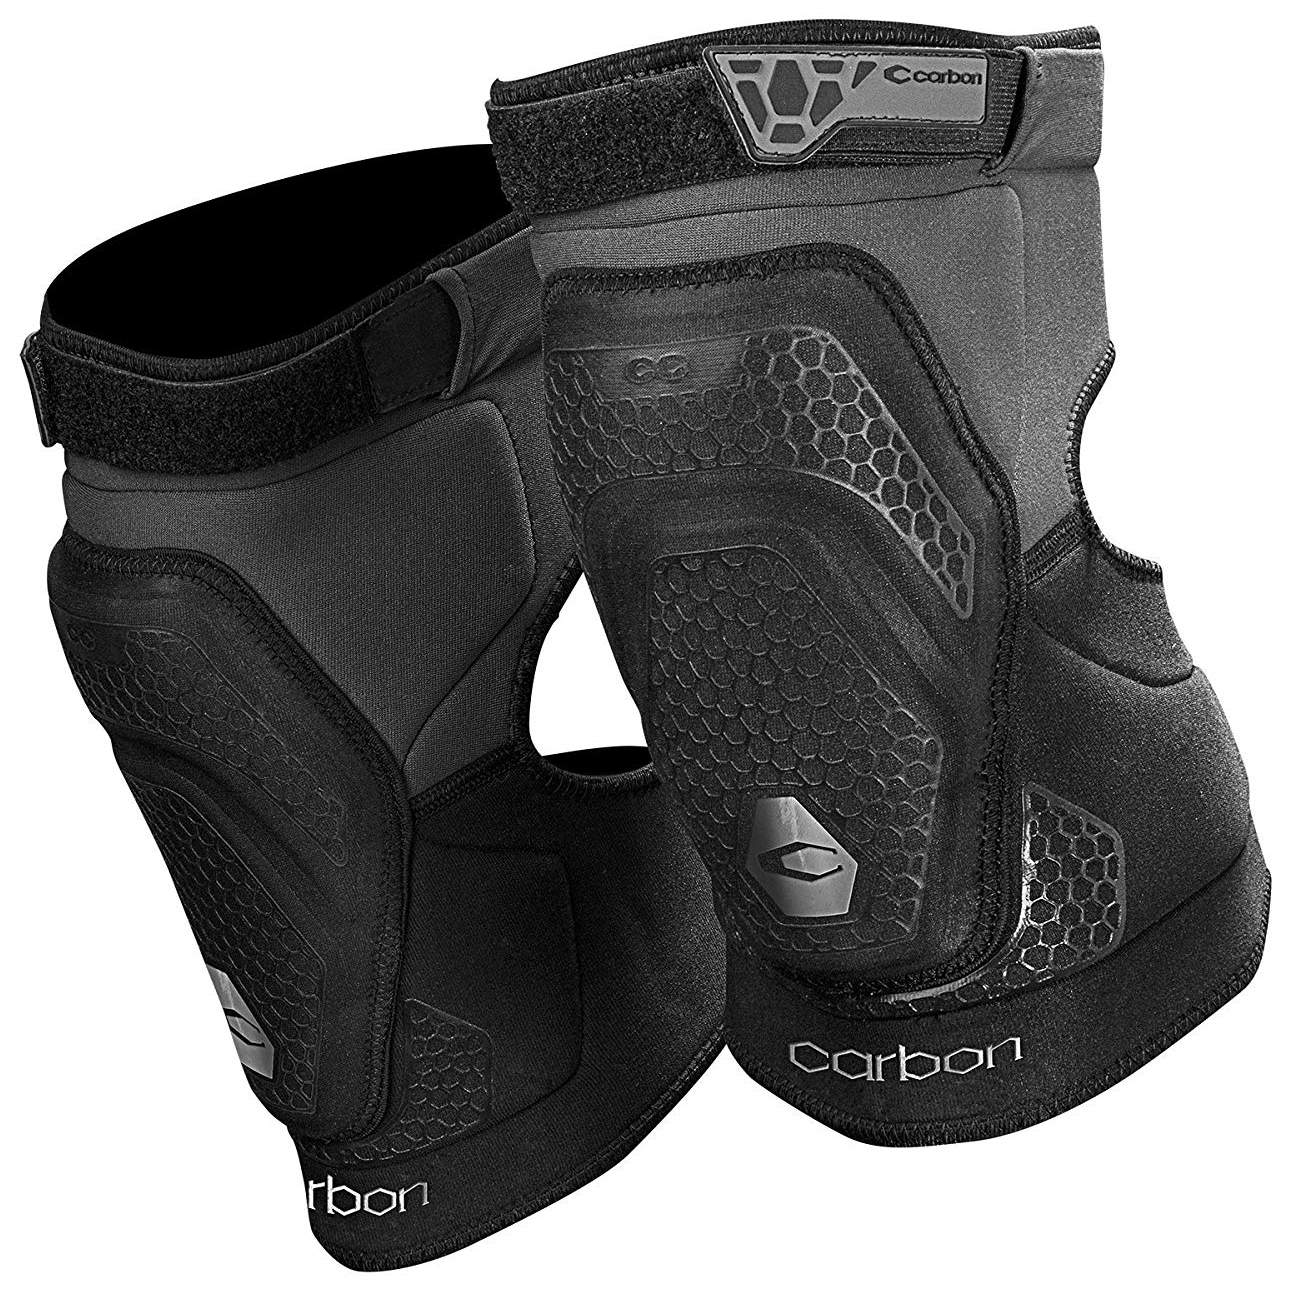 Carbon CC Paintball Knee Pads